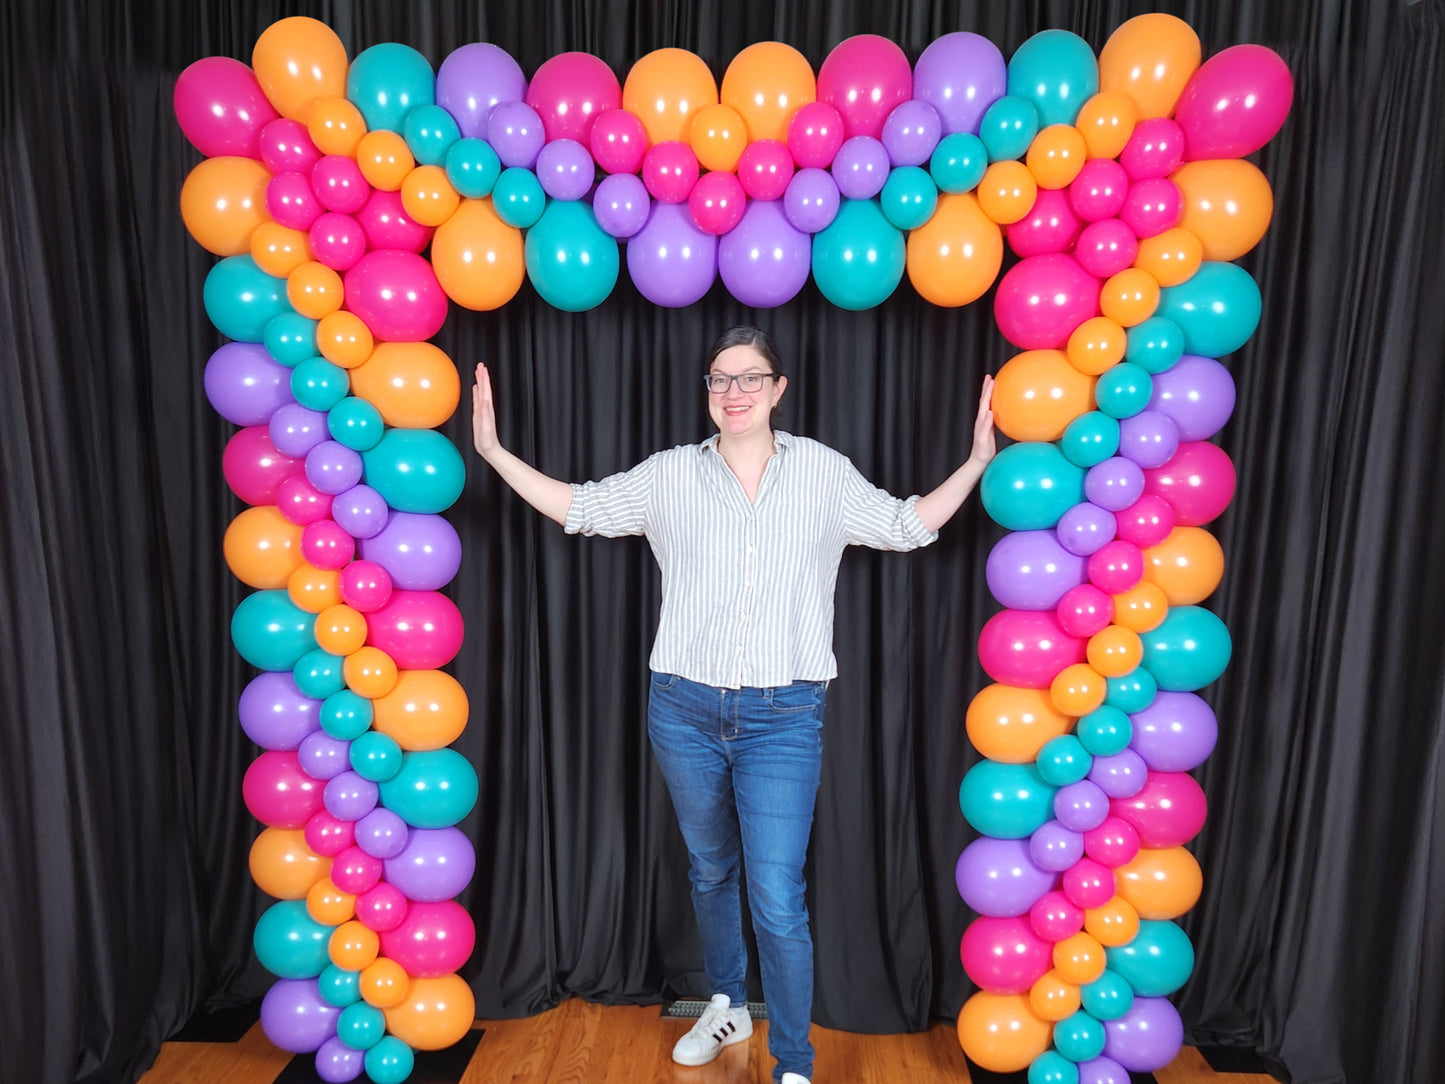 Square Balloon Arch Tutorial and Plans | Digital Balloon Recipe